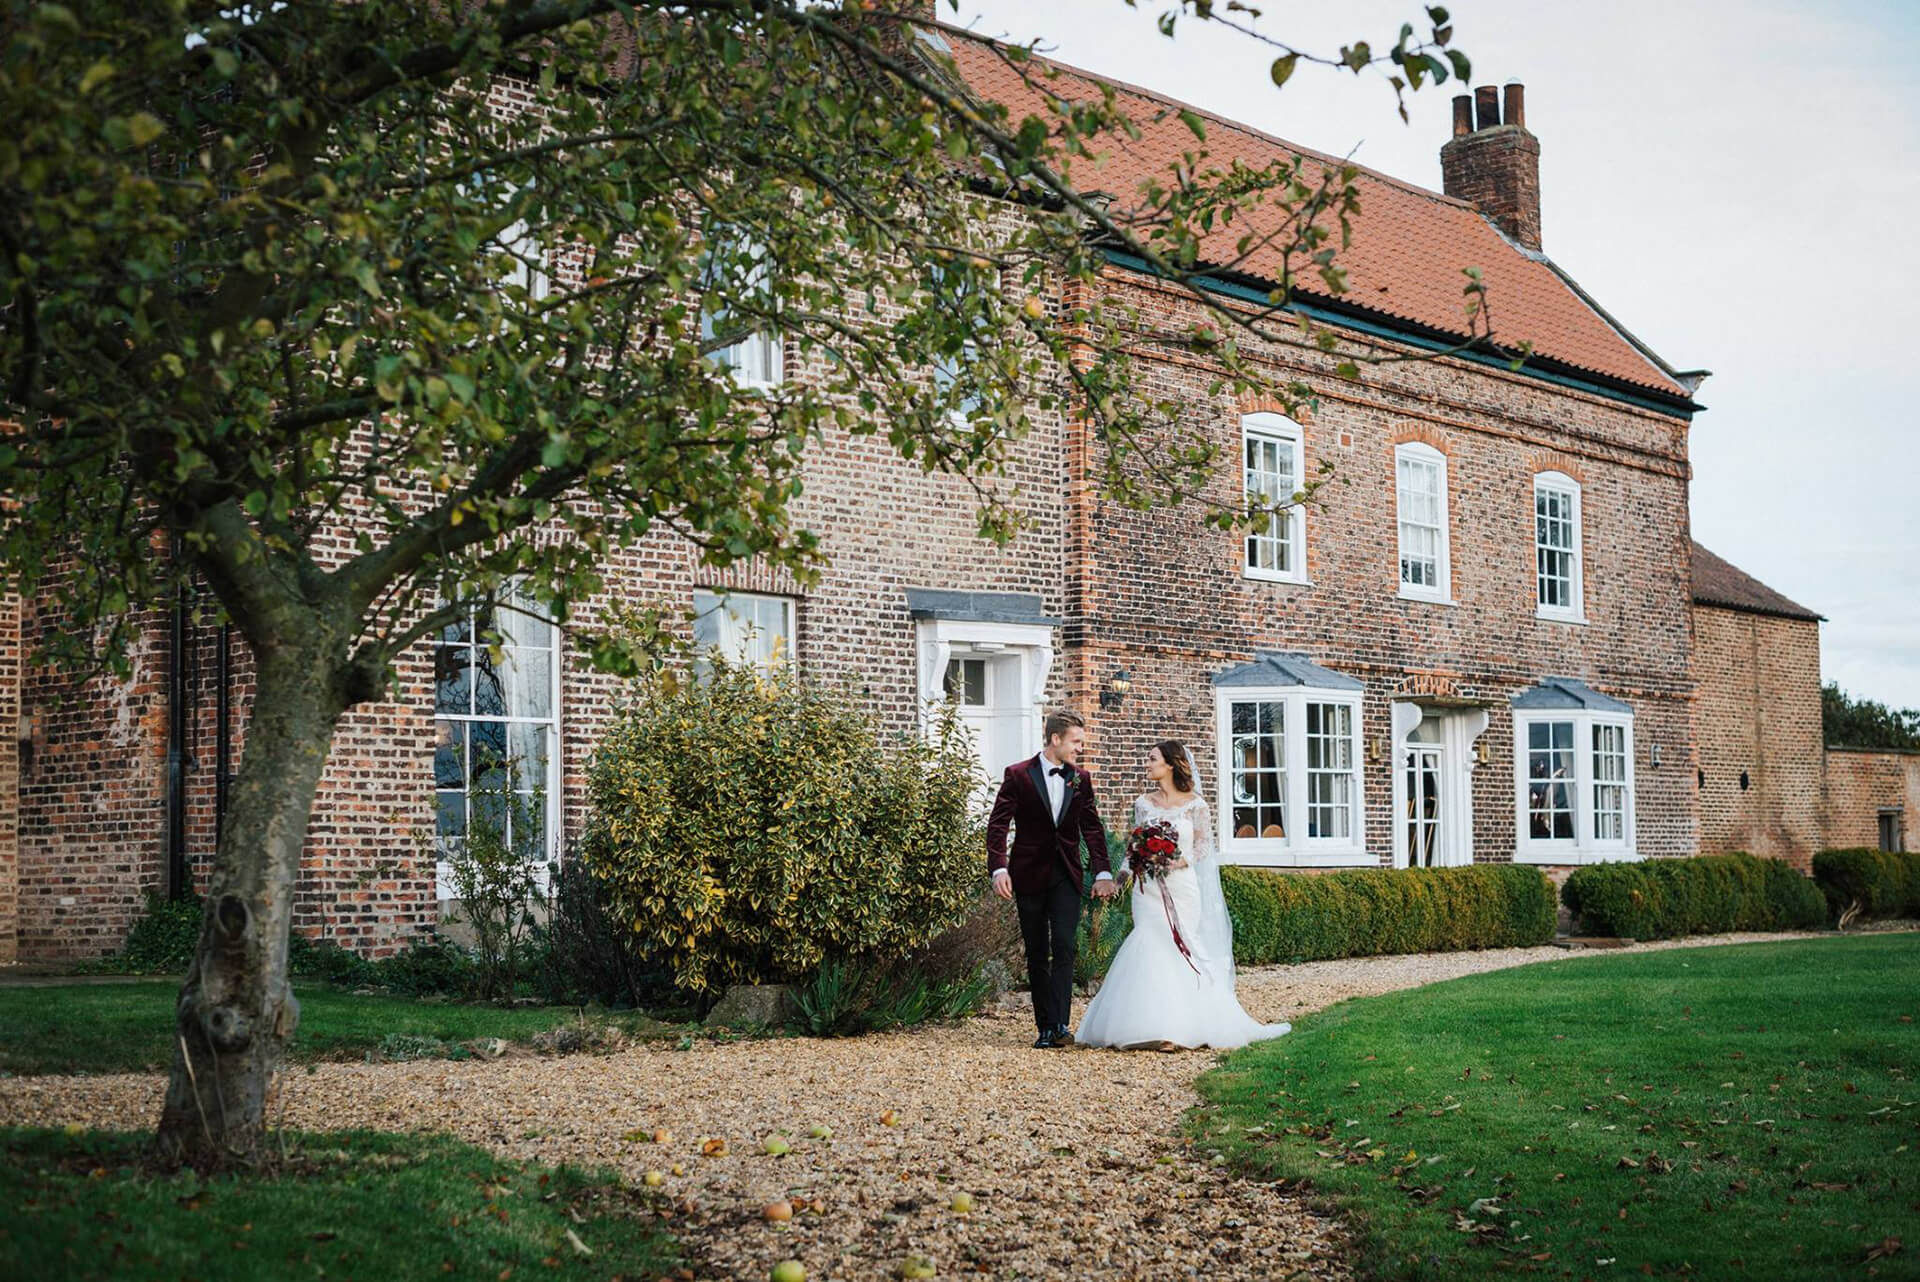 The beautiful Jade and Josh, strolling the Manor grounds. Shot by <a href="http://www.sugarbirdphoto.co.uk/" target="_blank">Sugarbird Photography</a>